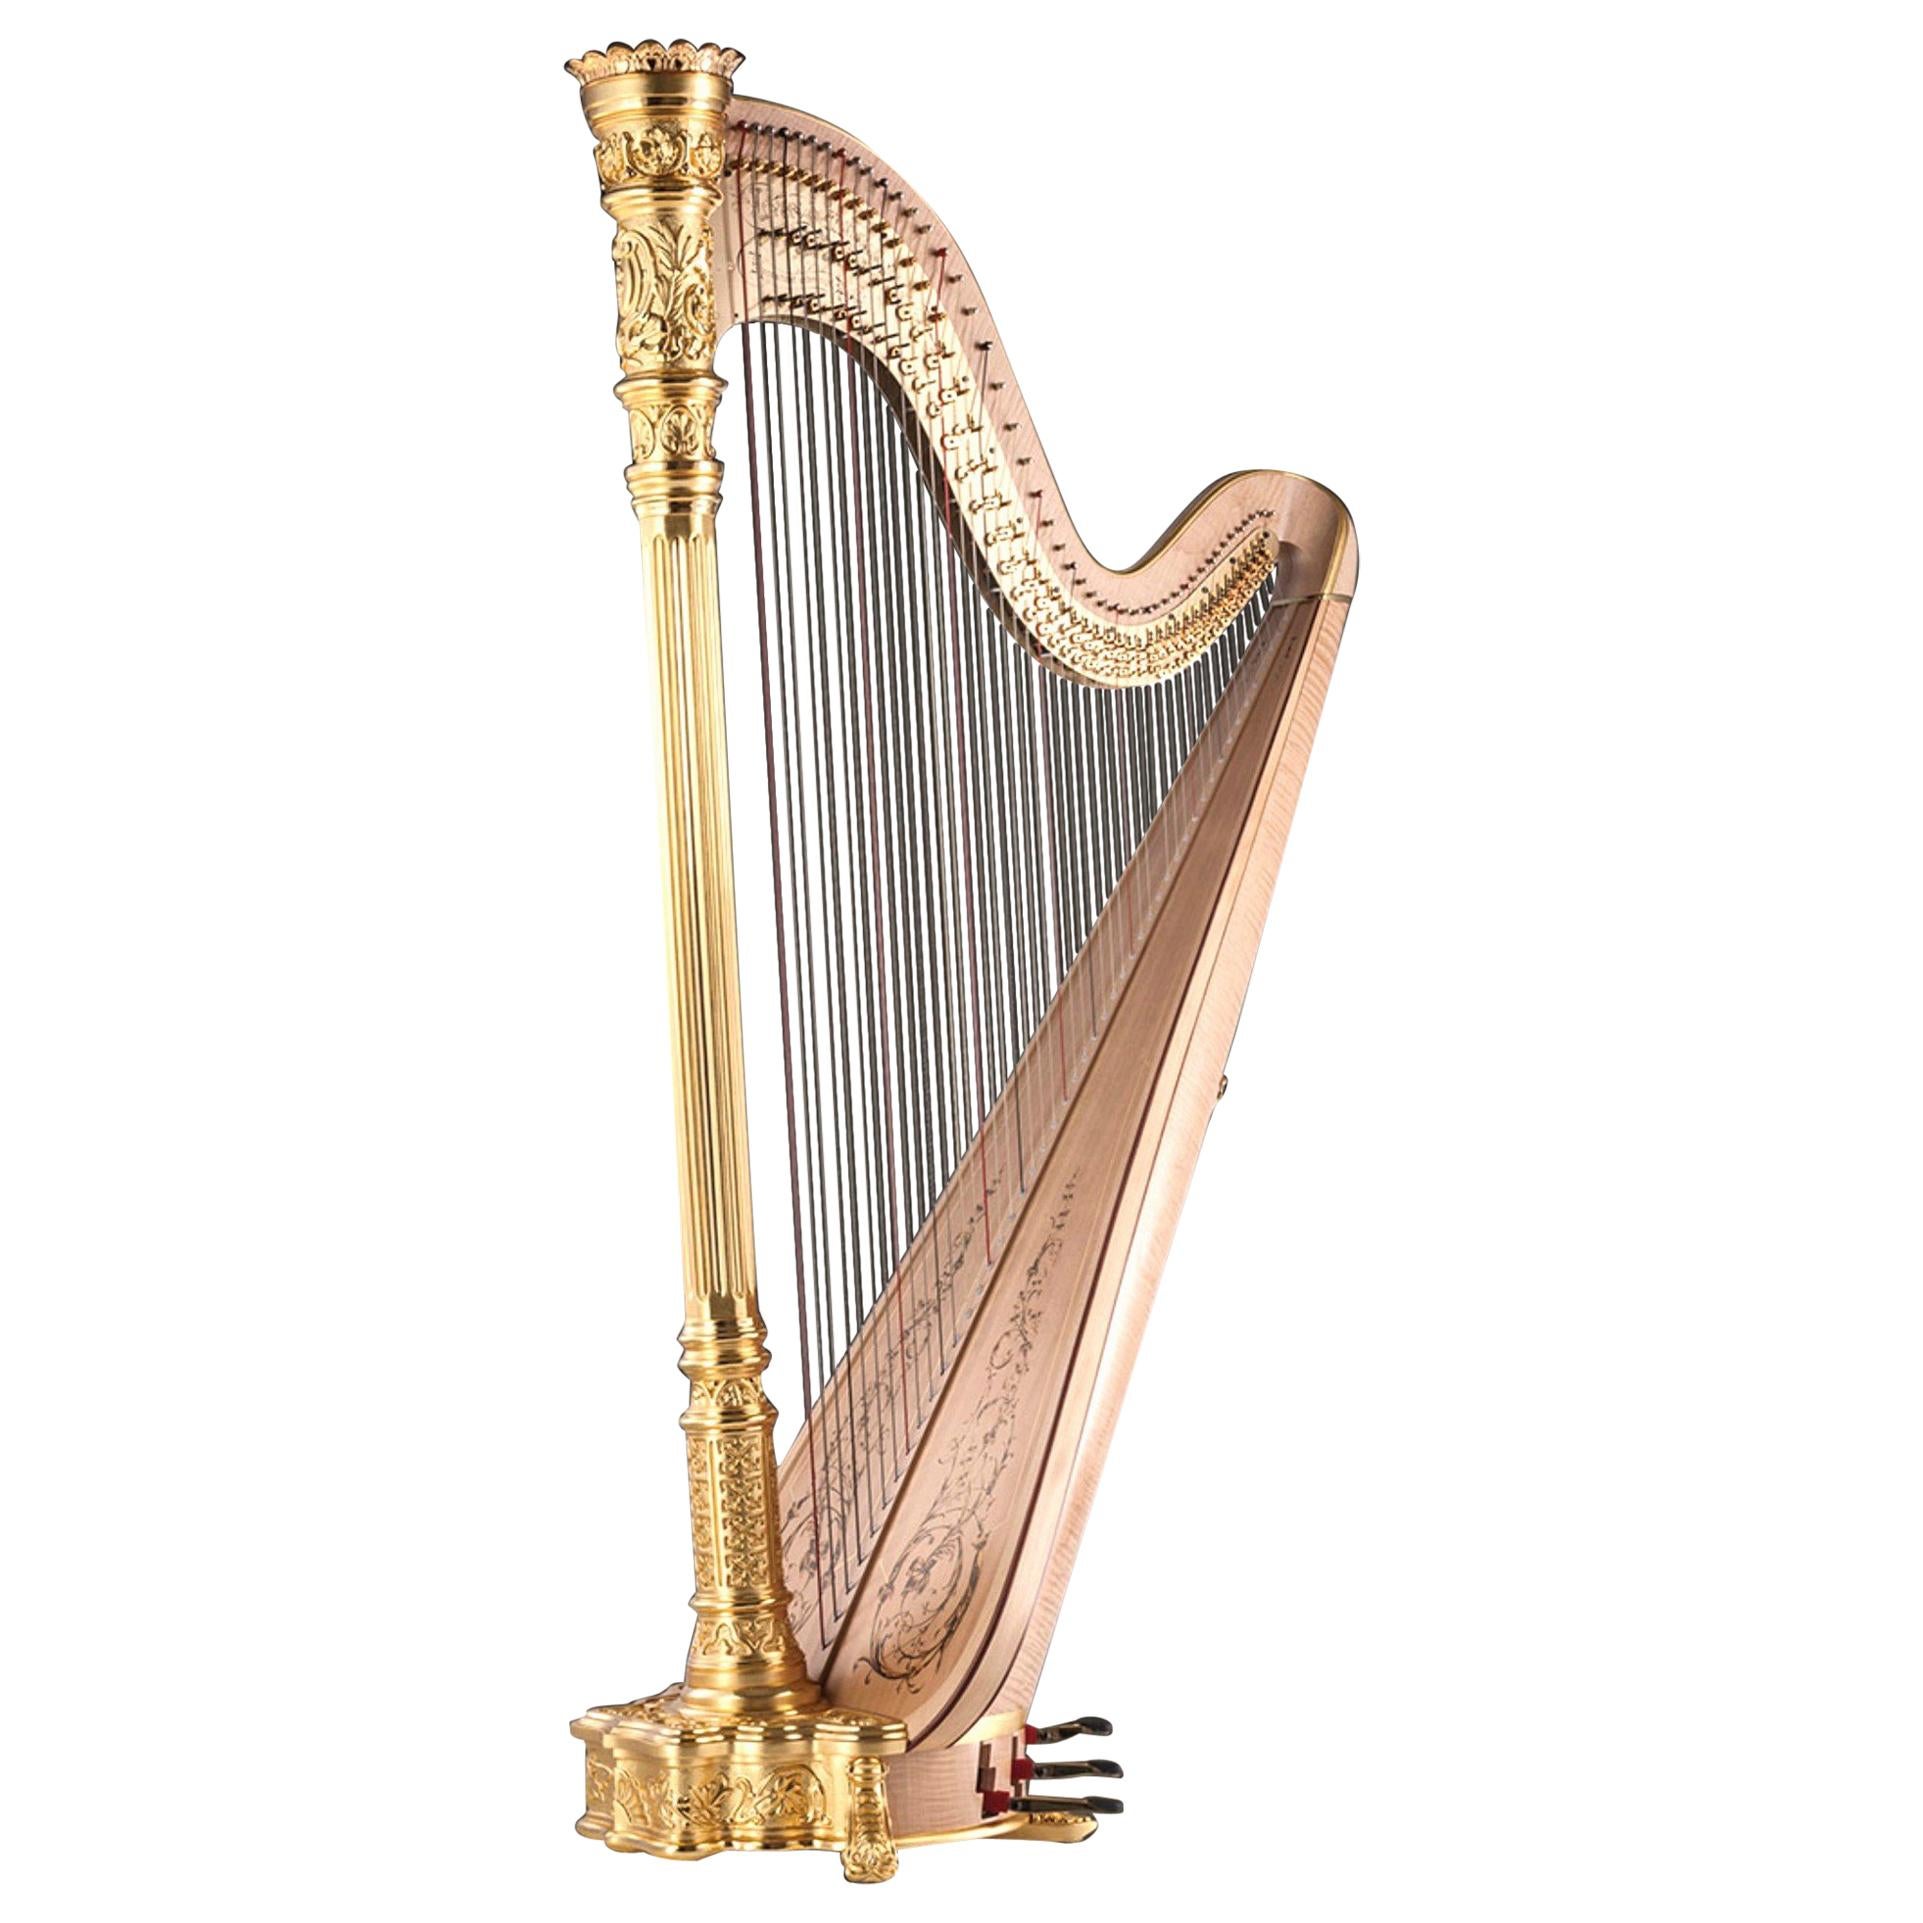 1915 Premium Style 23 Gold Lyon and Healy Concert Grand Harp